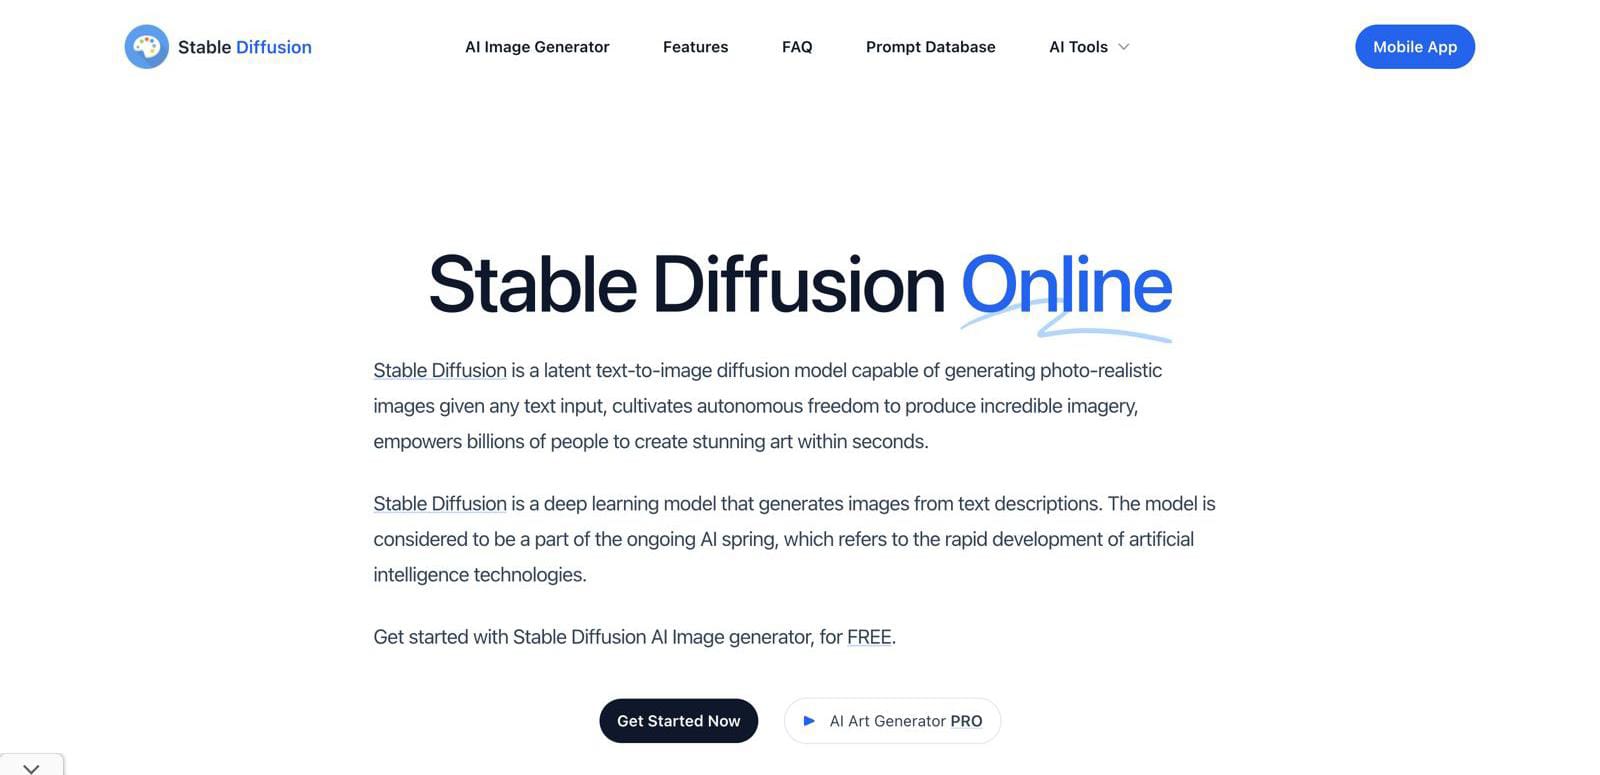 Home page of Stable Diffusion AI tool.